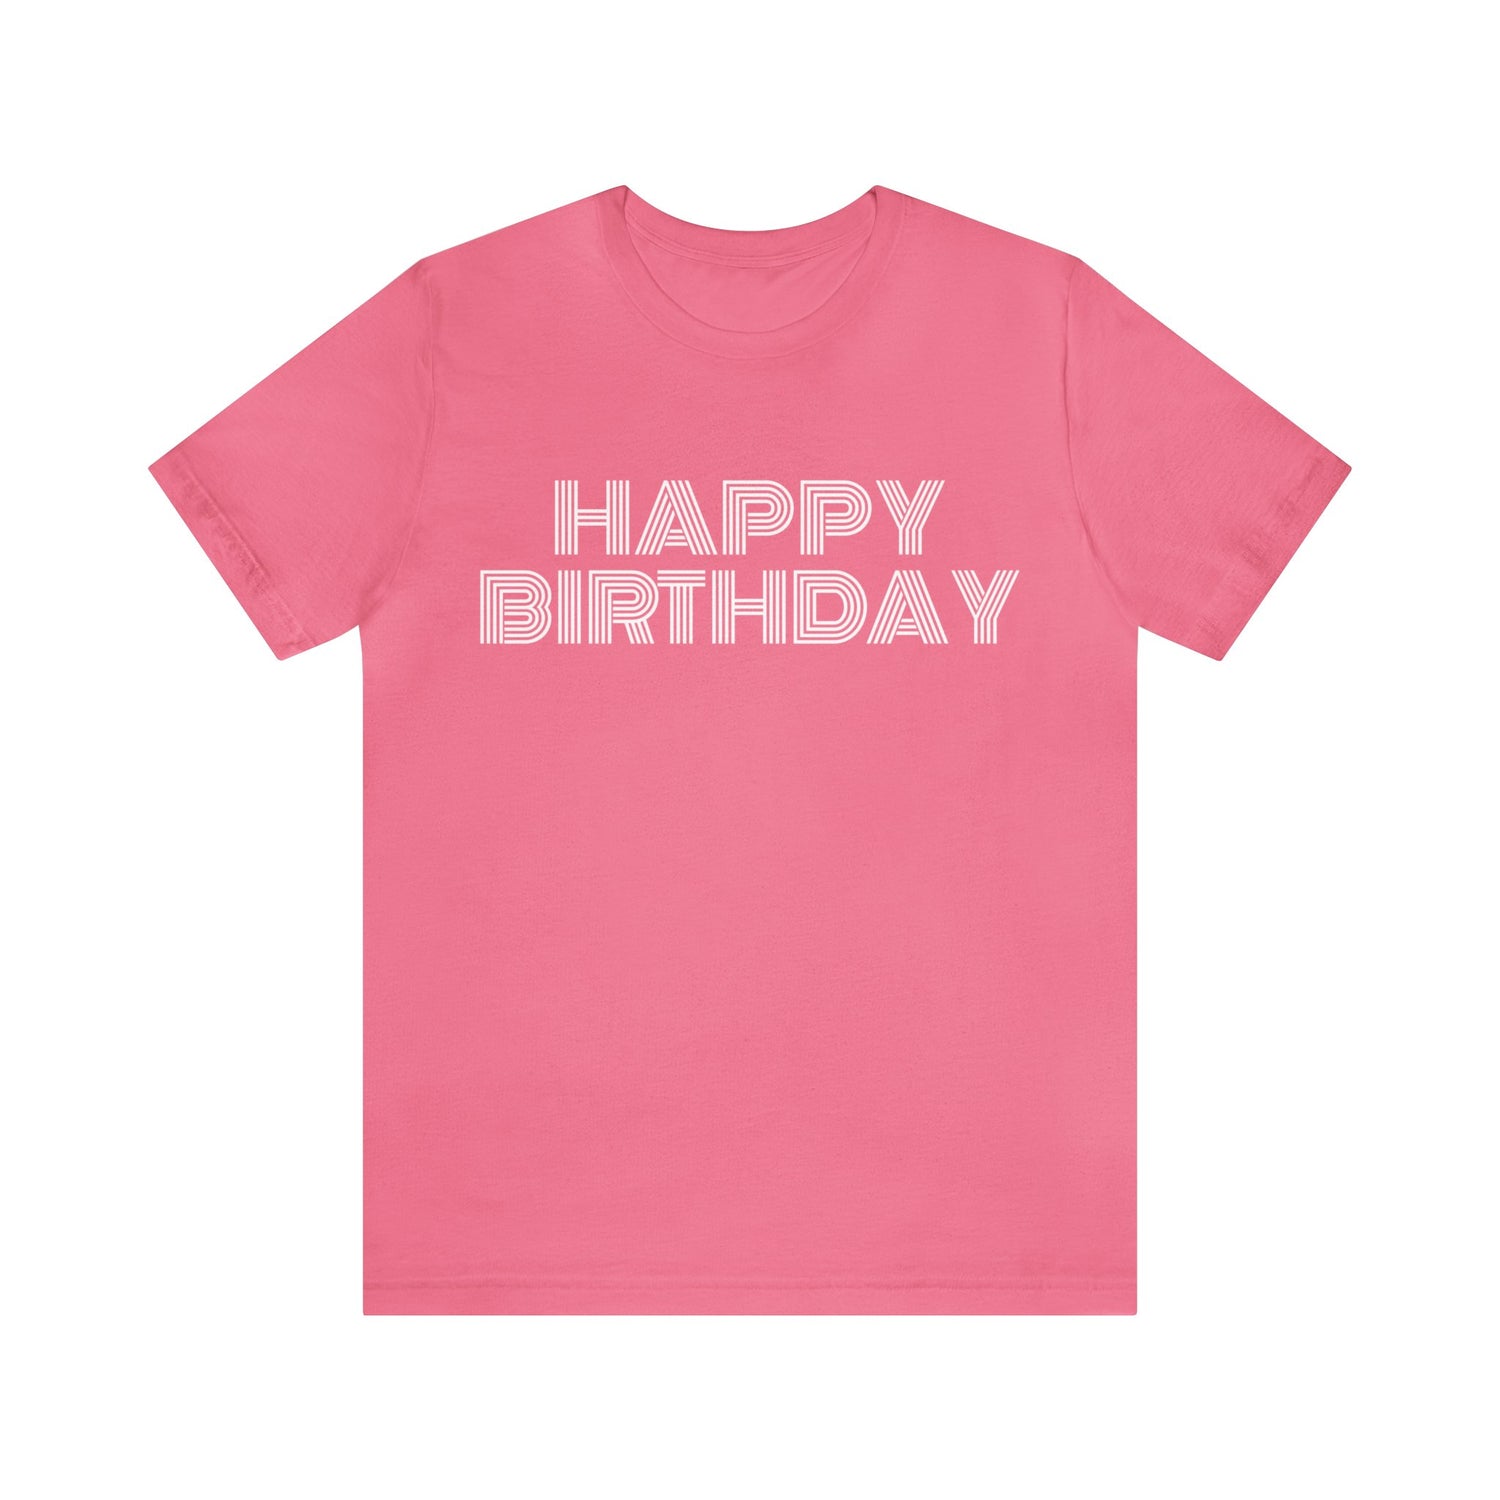 Charity Pink T-Shirt Tshirt Gift for Friends and Family Short Sleeve T Shirt Birthday Petrova Designs